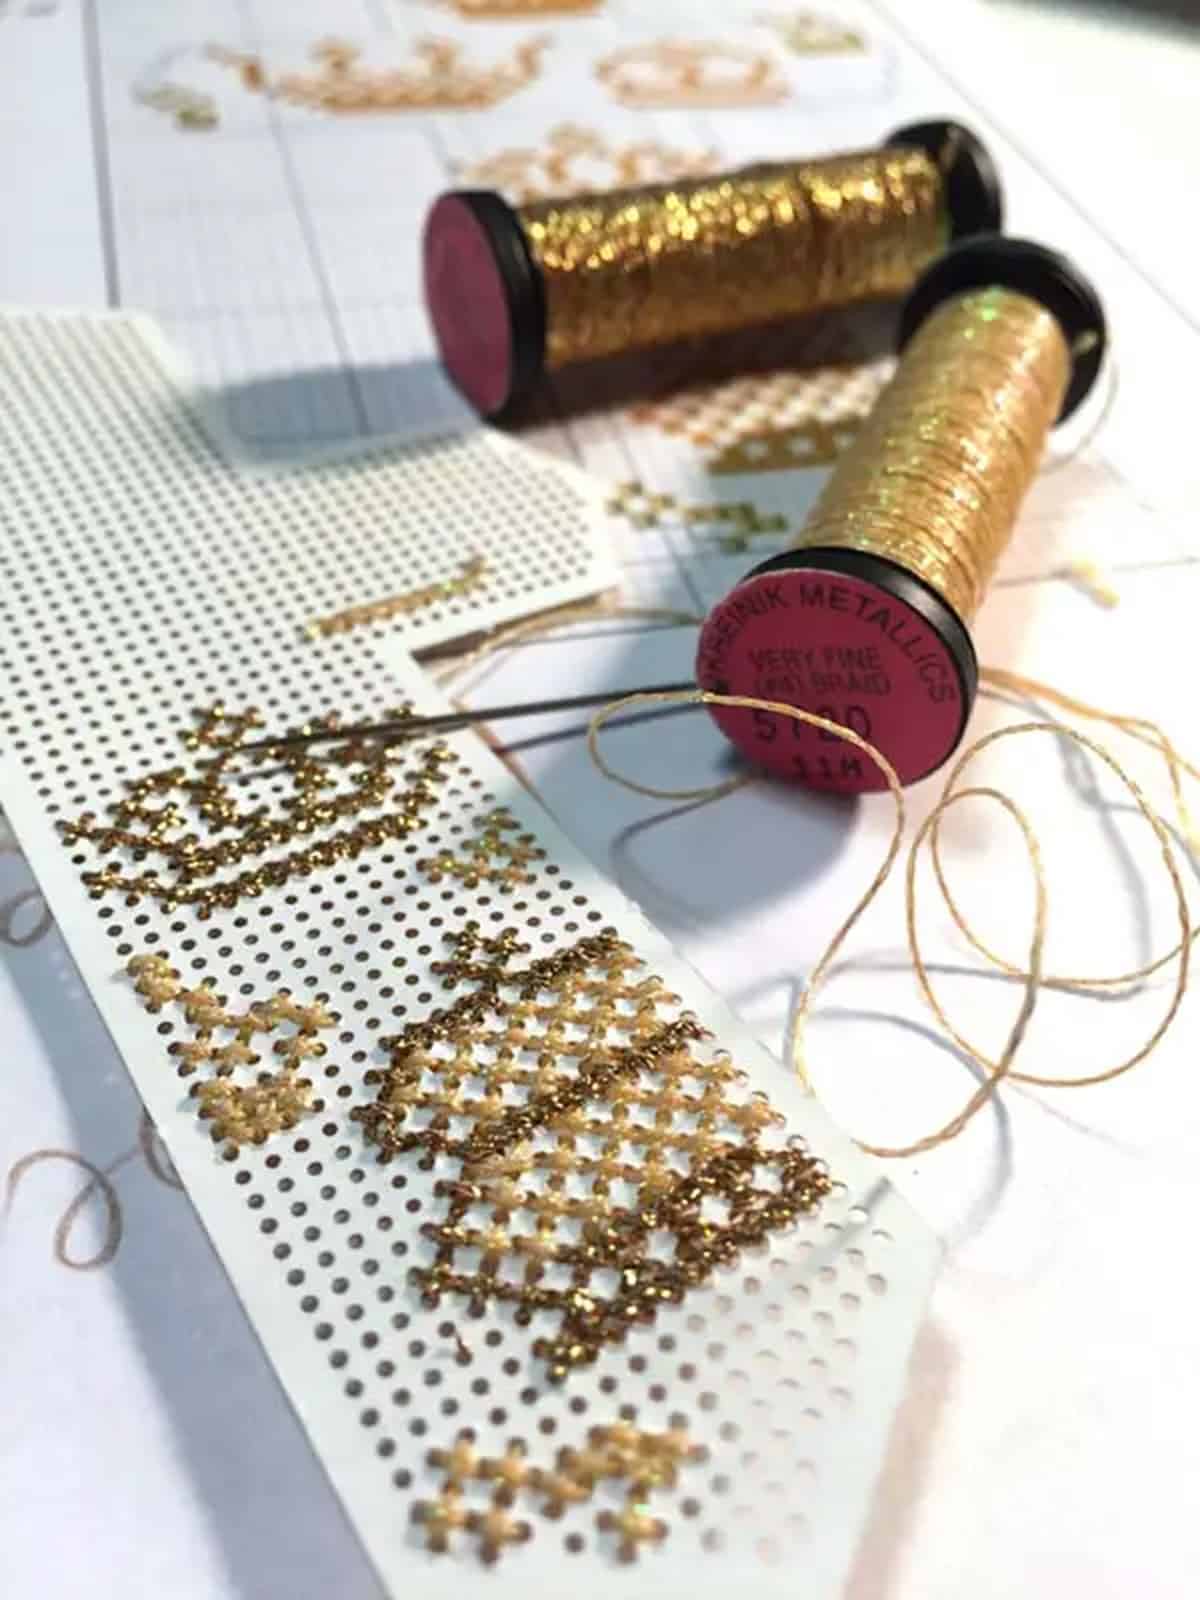 Metallic Braids add light and colour to designs, and are meant to be used next to, or in place of, embroidery floss.